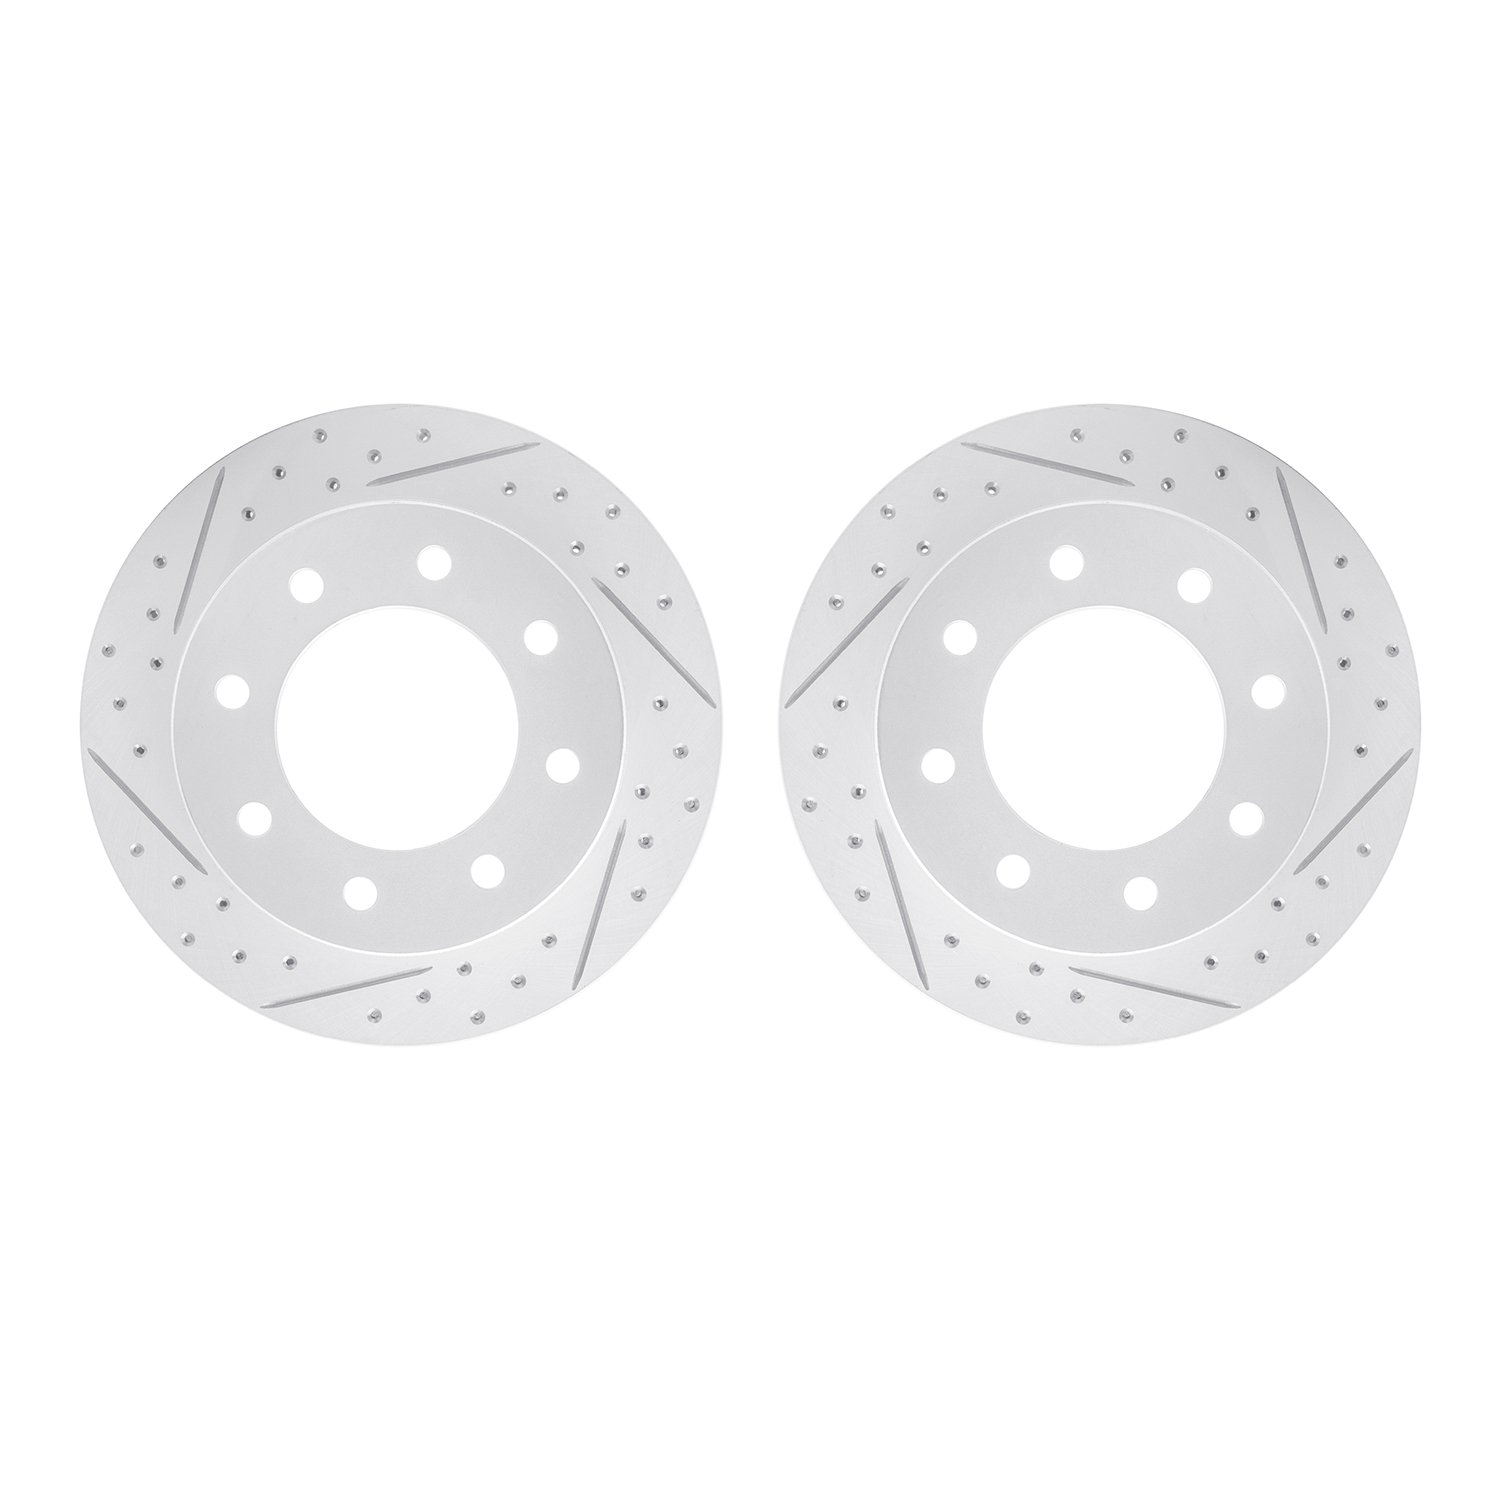 2002-48038 Geoperformance Drilled/Slotted Brake Rotors, Fits Select GM, Position: Rear